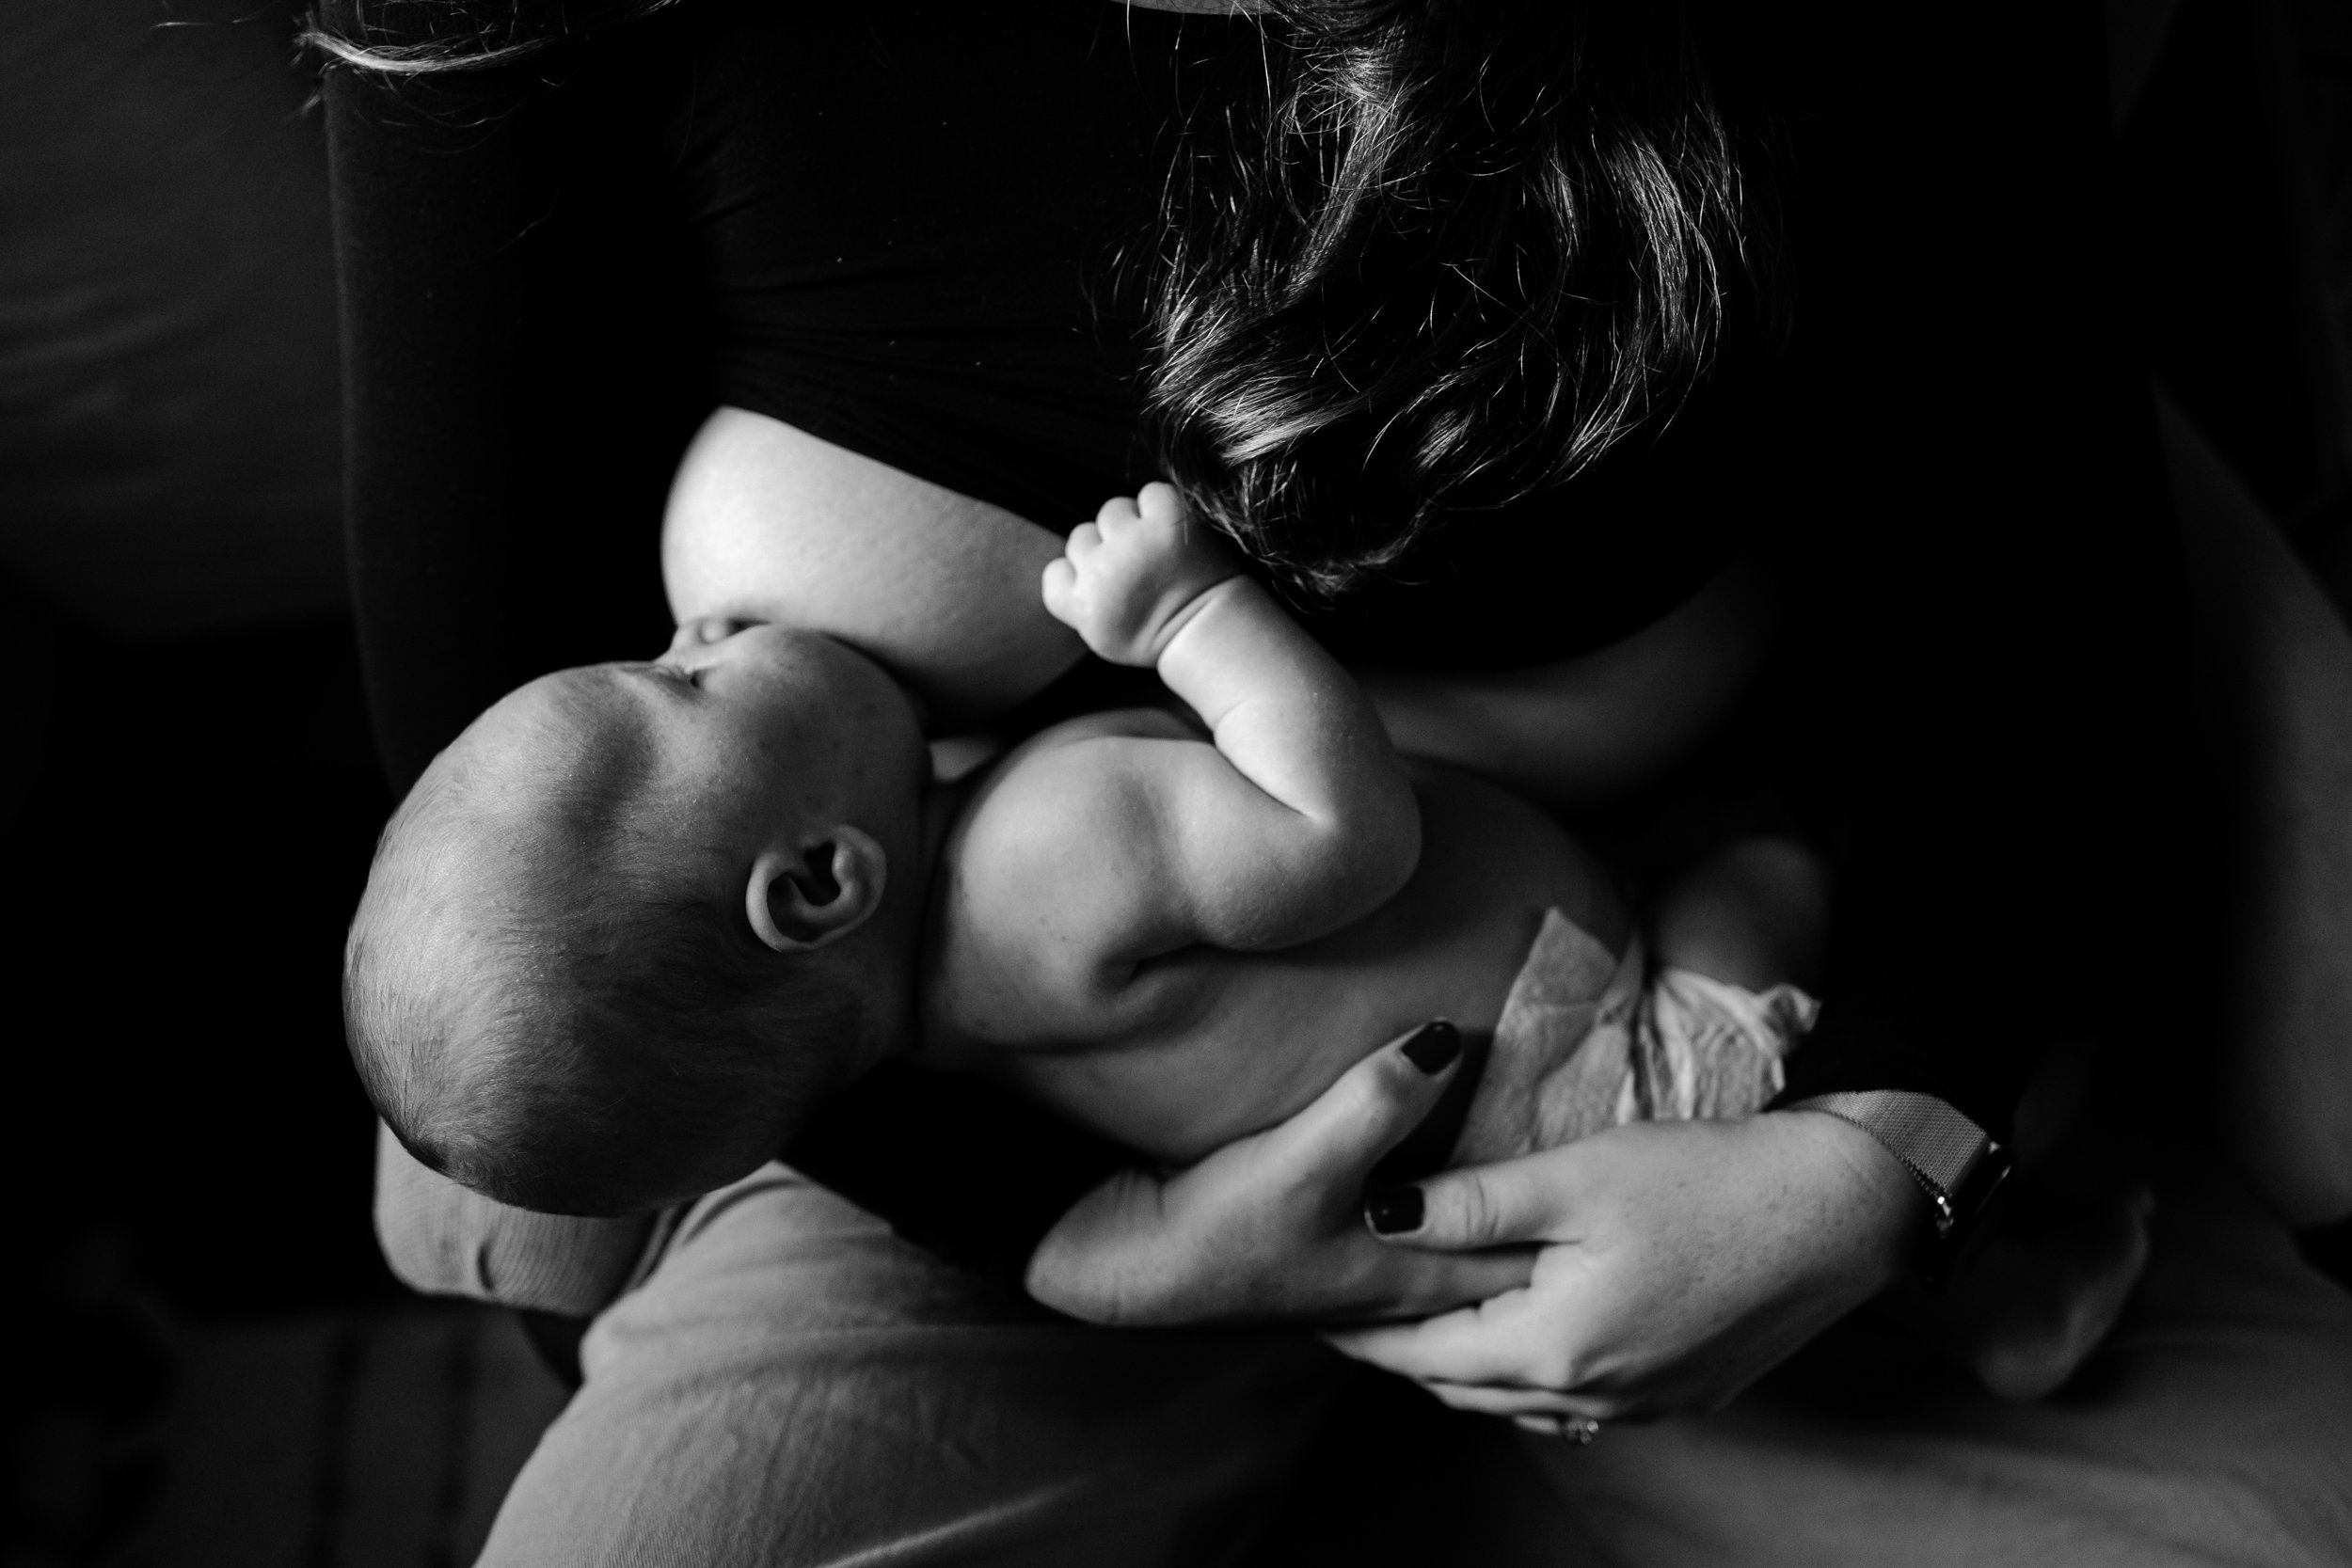 Close up black and white portrait of baby breastfeeding, chubby arms, mom's hands, Philly newborn photography